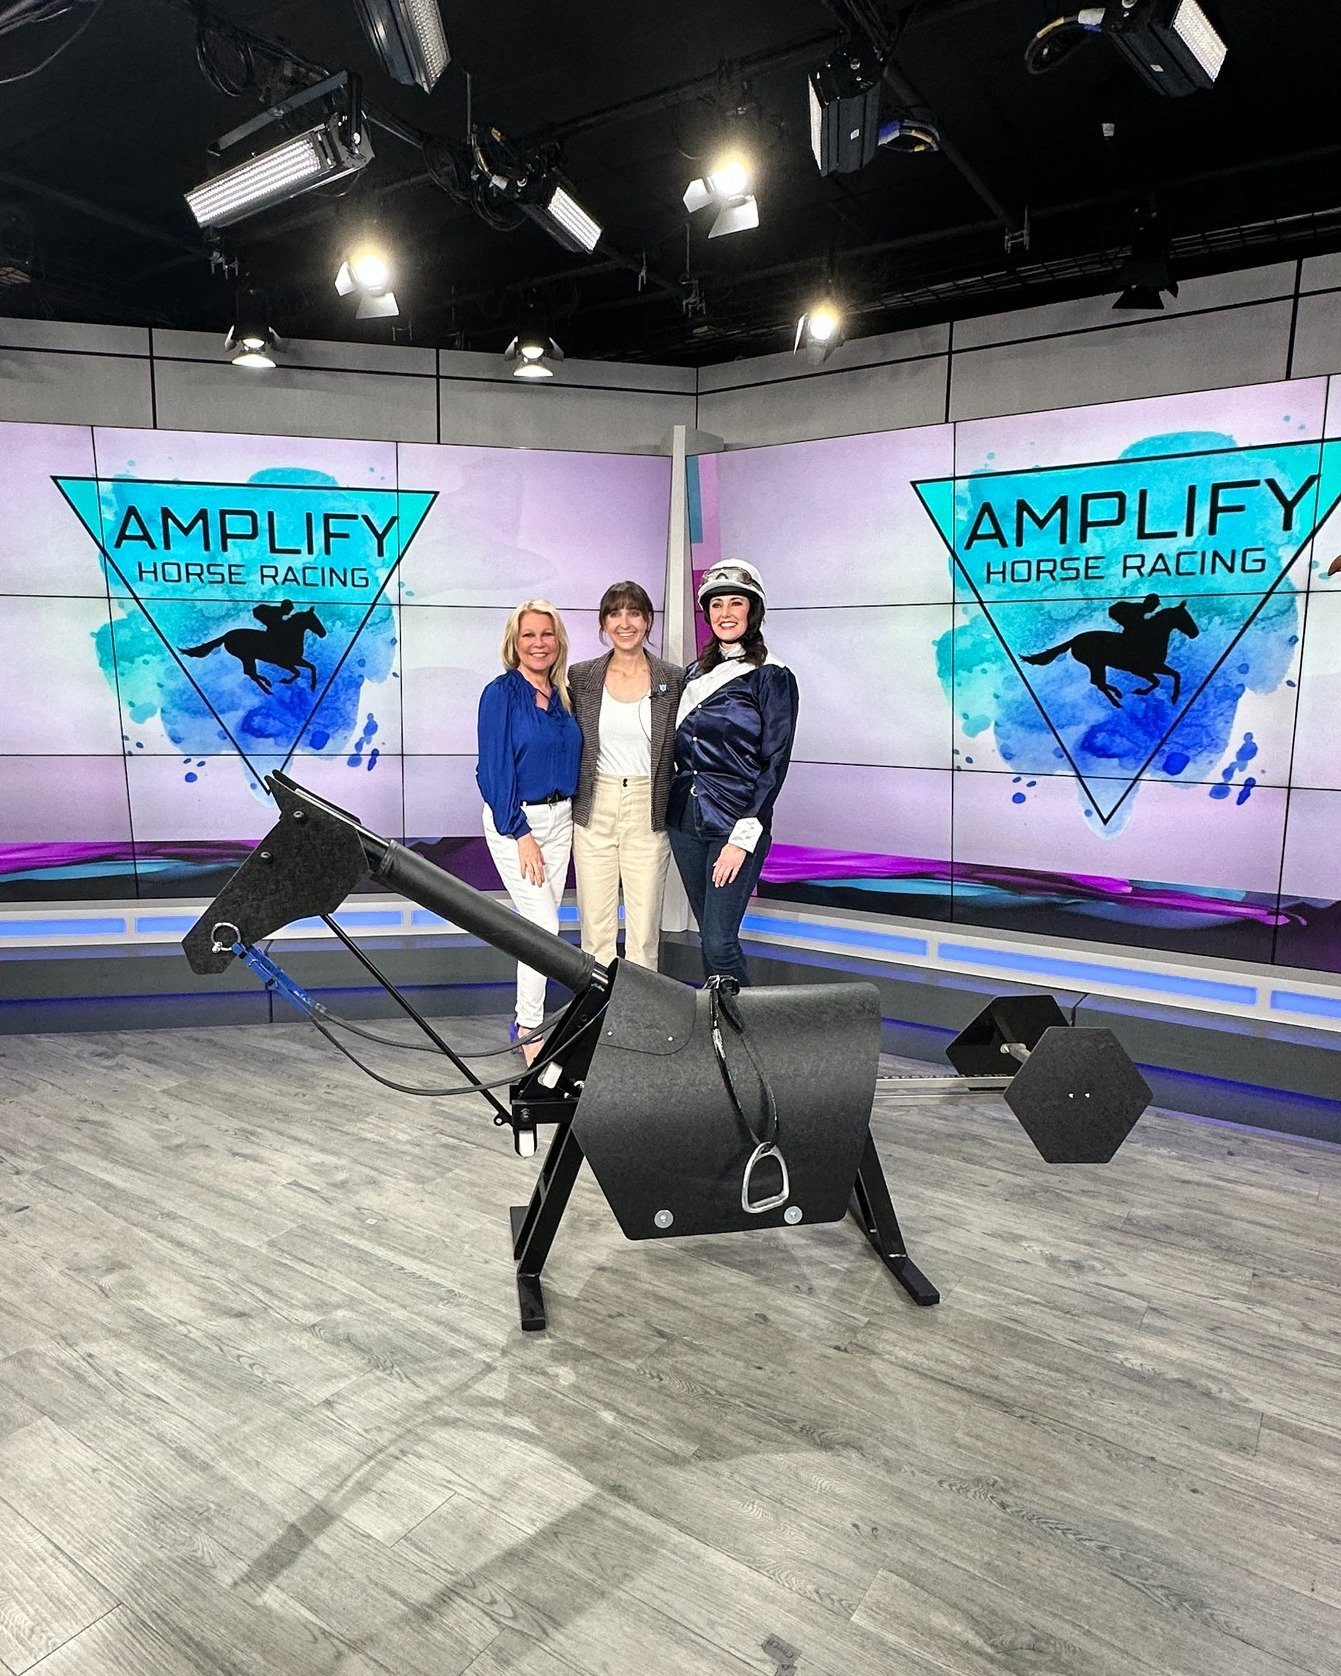 An already exciting week is about to get even better on Friday morning when our segment on @livefromchevychase airs around 9am on Fox56 in Lexington!

Our new simulator, Tron, made its media debut as our own @annise_montplaisir talked about Amplify&r